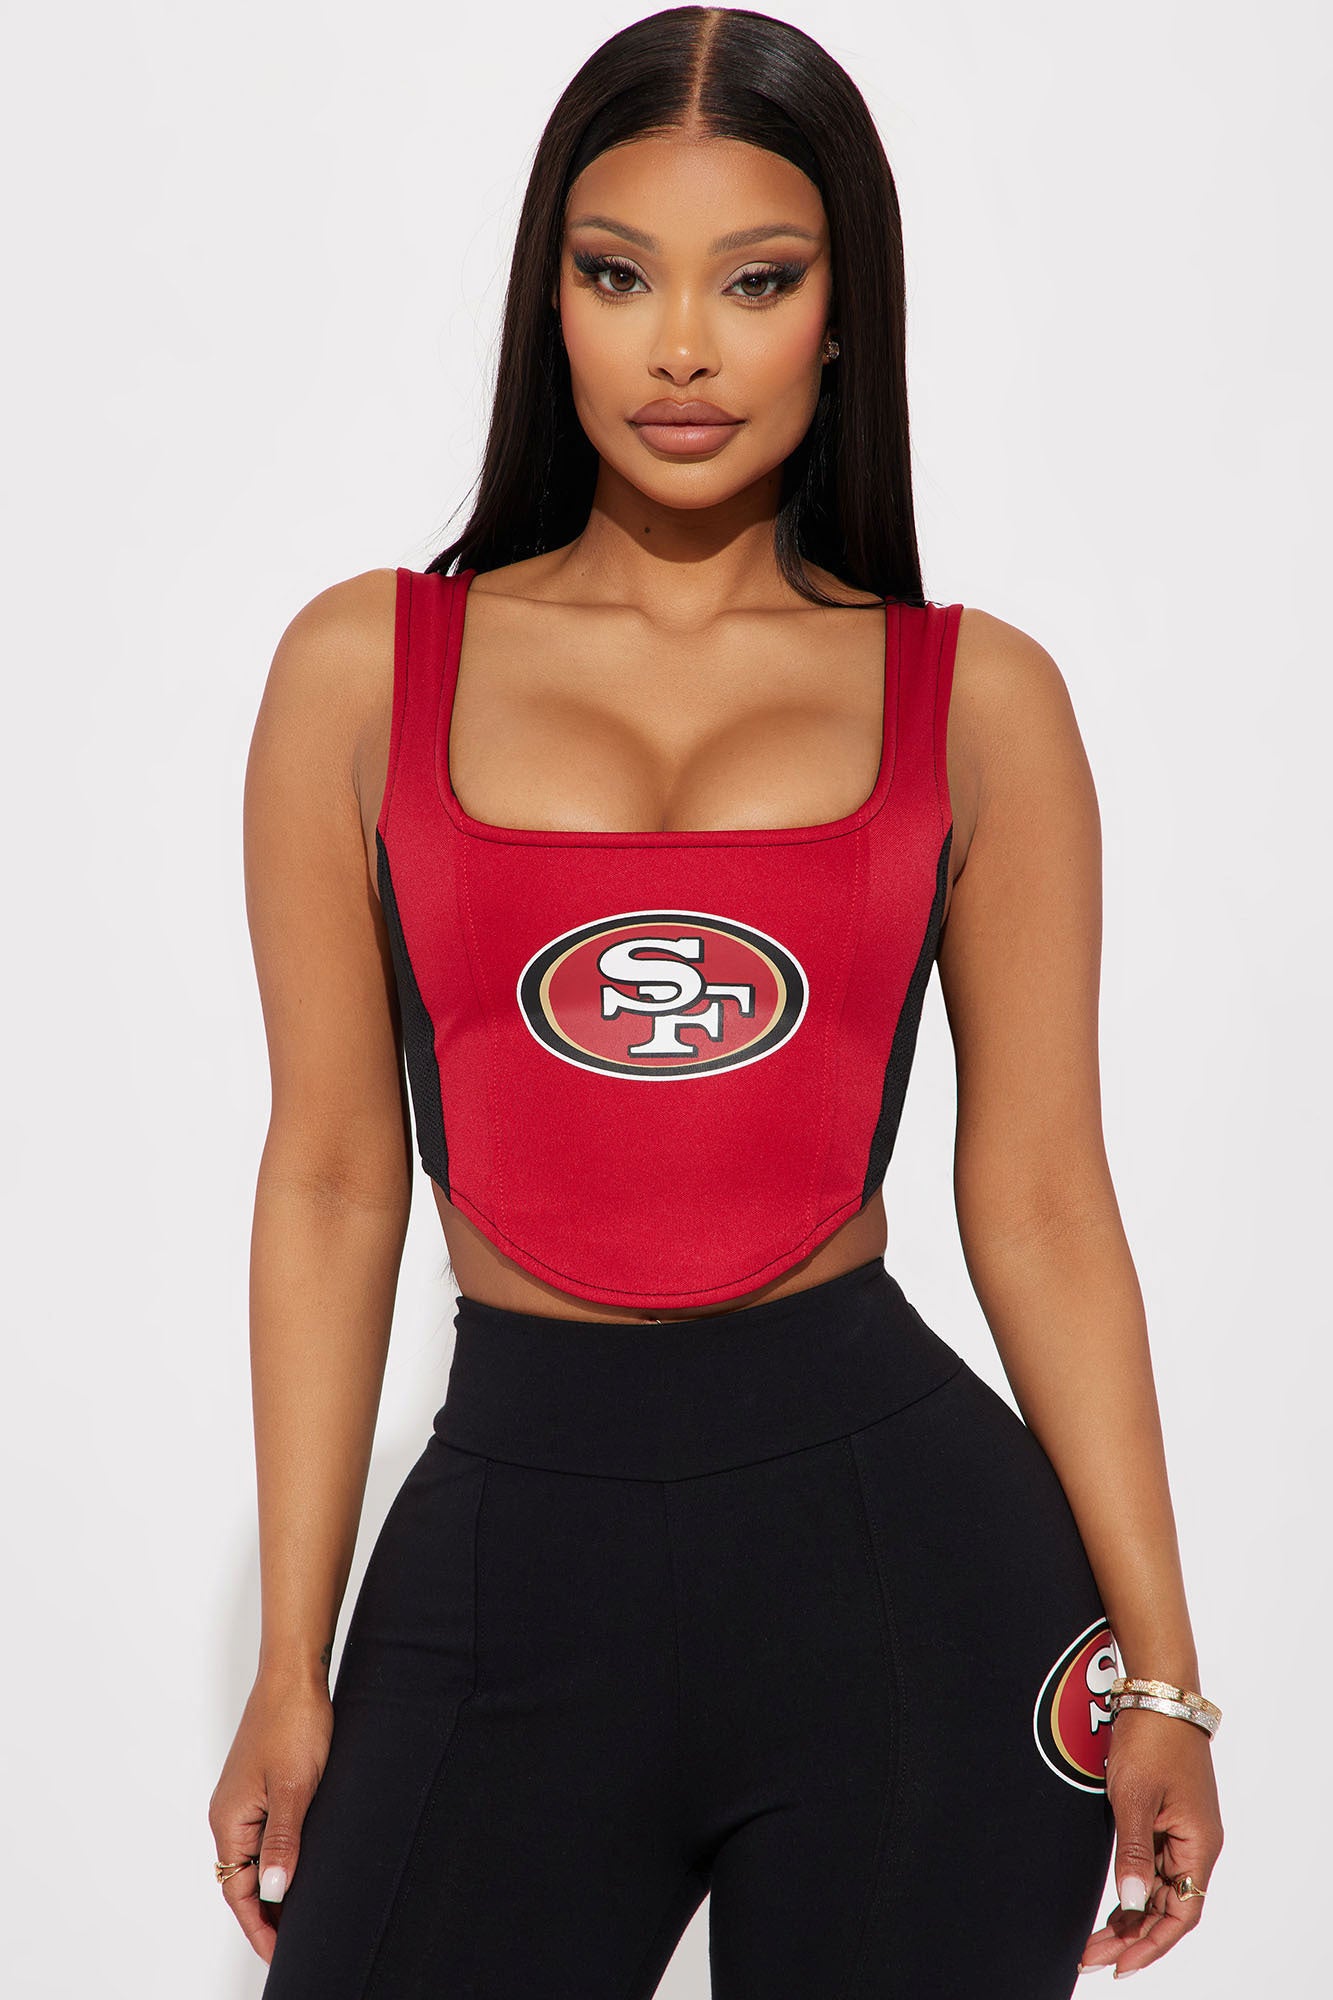 49ers Halftime Show Corset Top - Red/Black